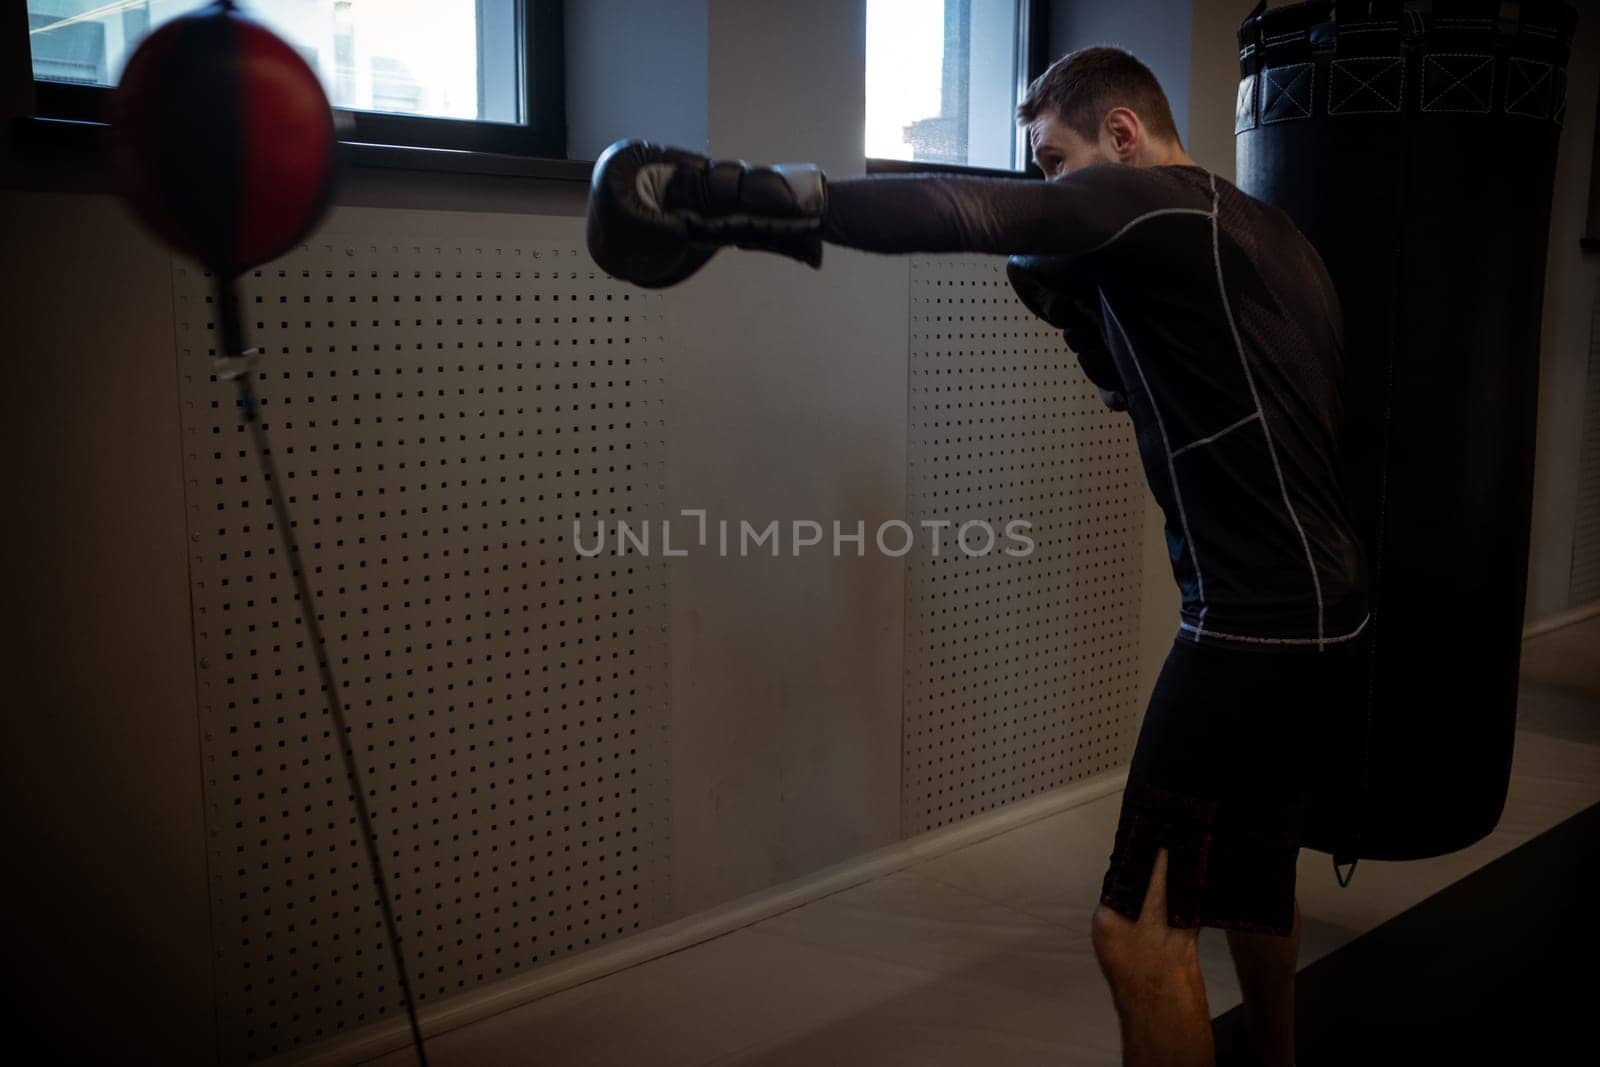 Dynamic scene capturing intense workout of motivated boxer practicing on floor-to-ceiling bag in gym, enhancing punch precision, speed and coordination in gym environment